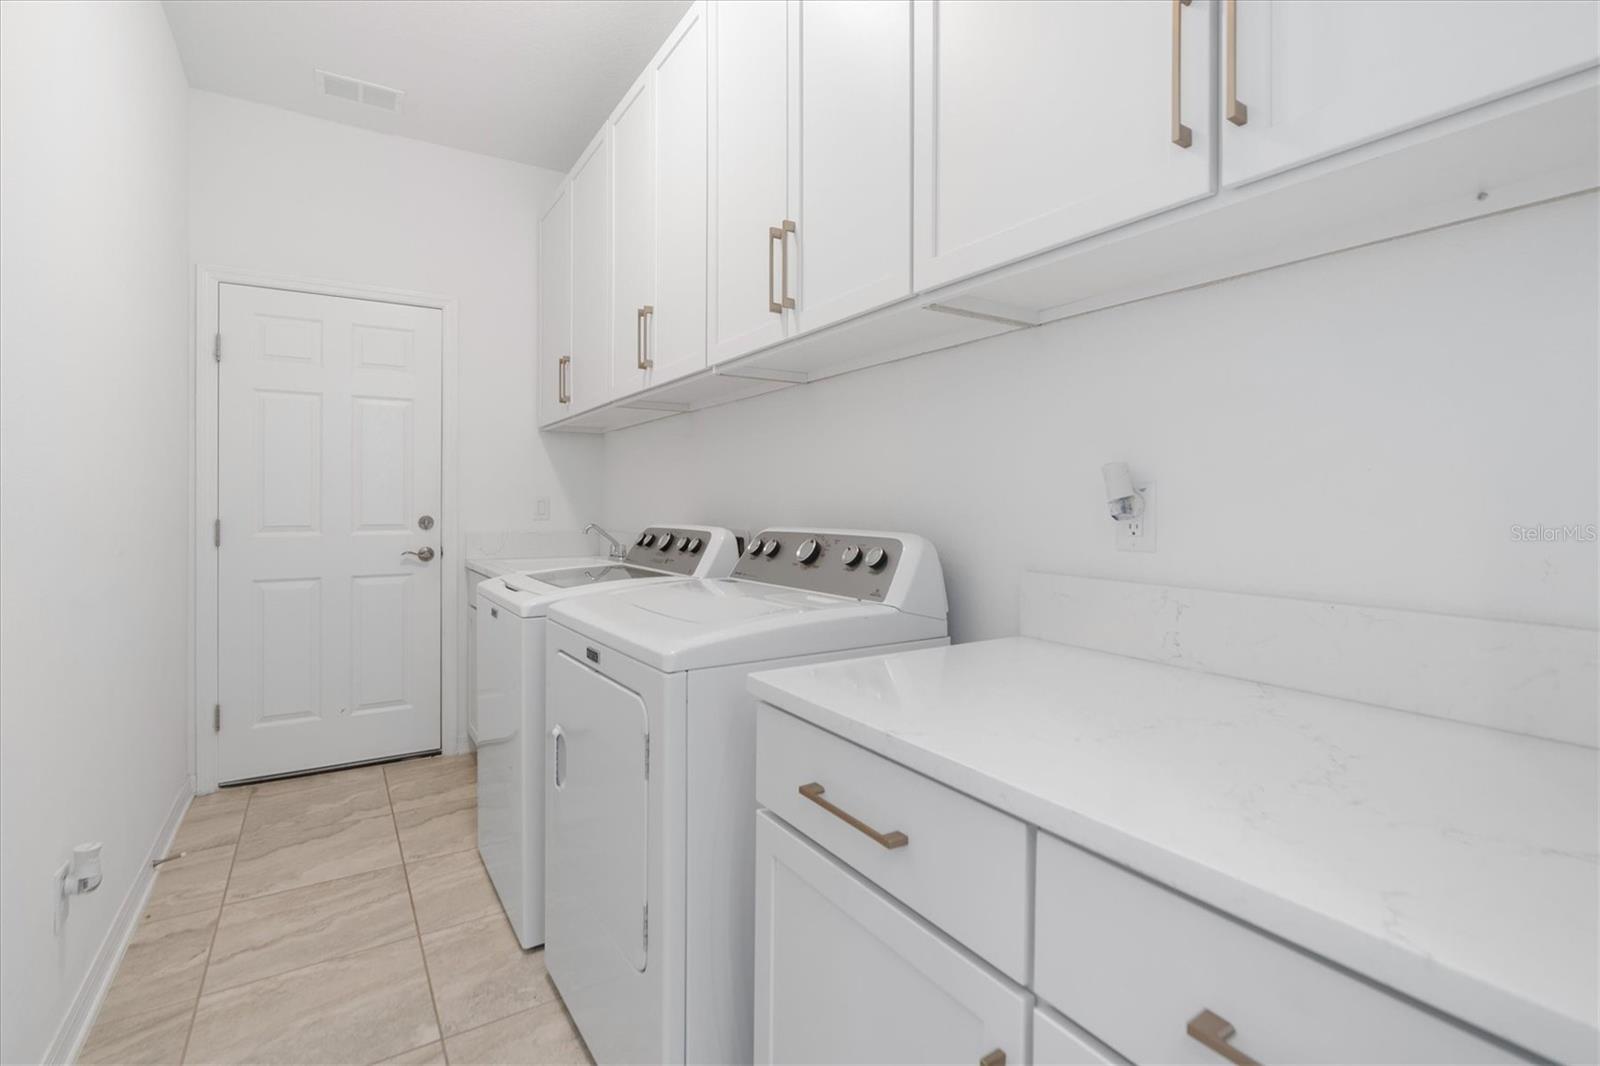 LAUNDRY WITH MANY CABINETS FOR STORAGE